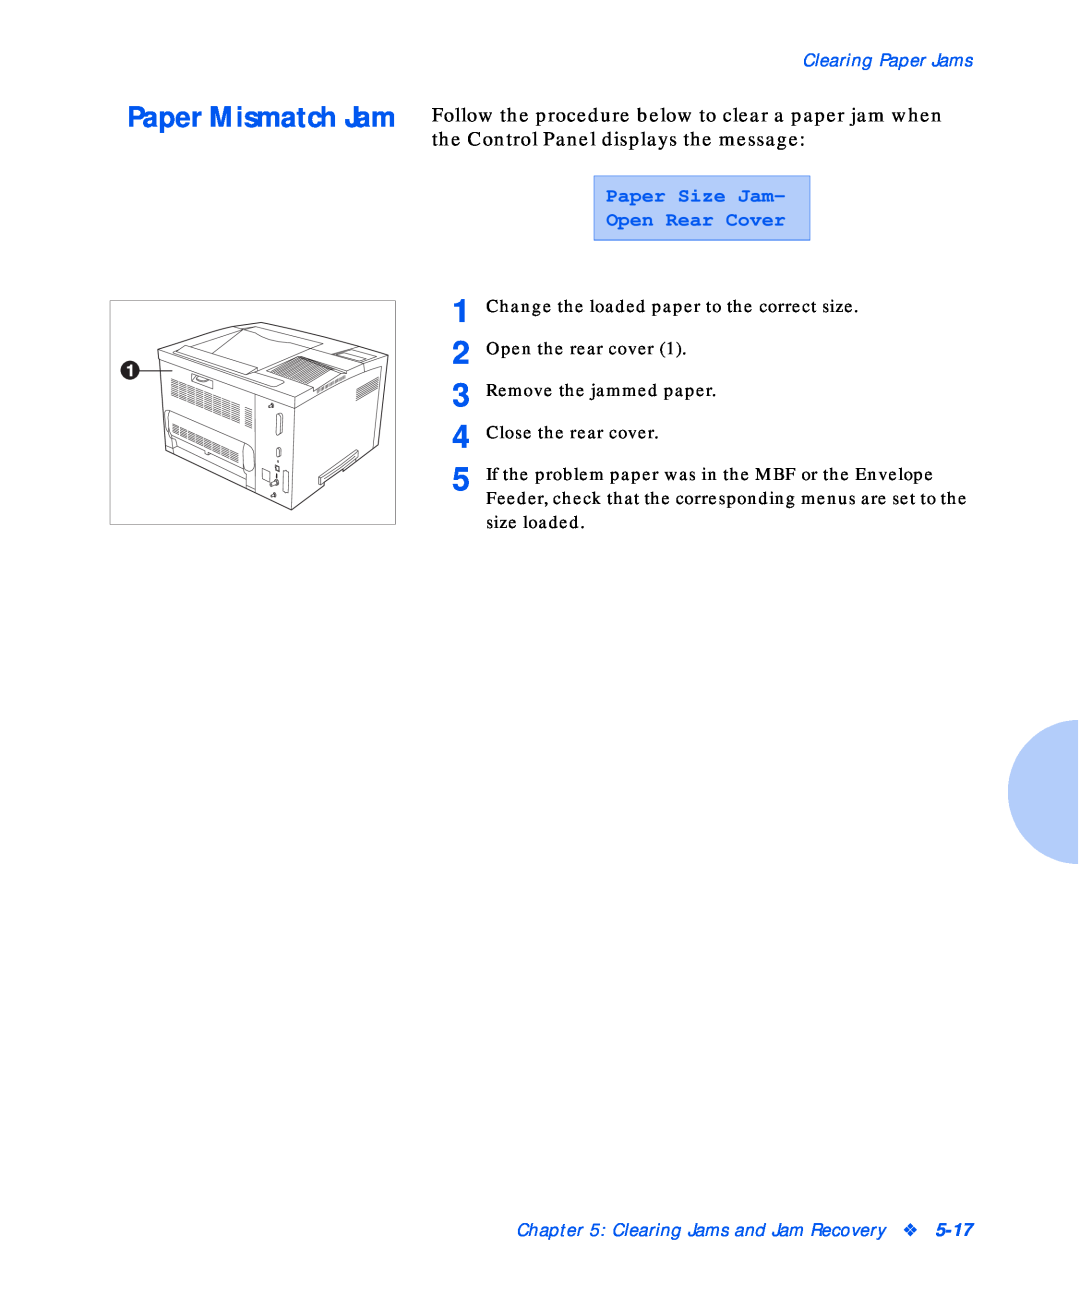 Xerox N17b manual Paper Size Jam Open Rear Cover, Clearing Paper Jams, Clearing Jams and Jam Recovery 